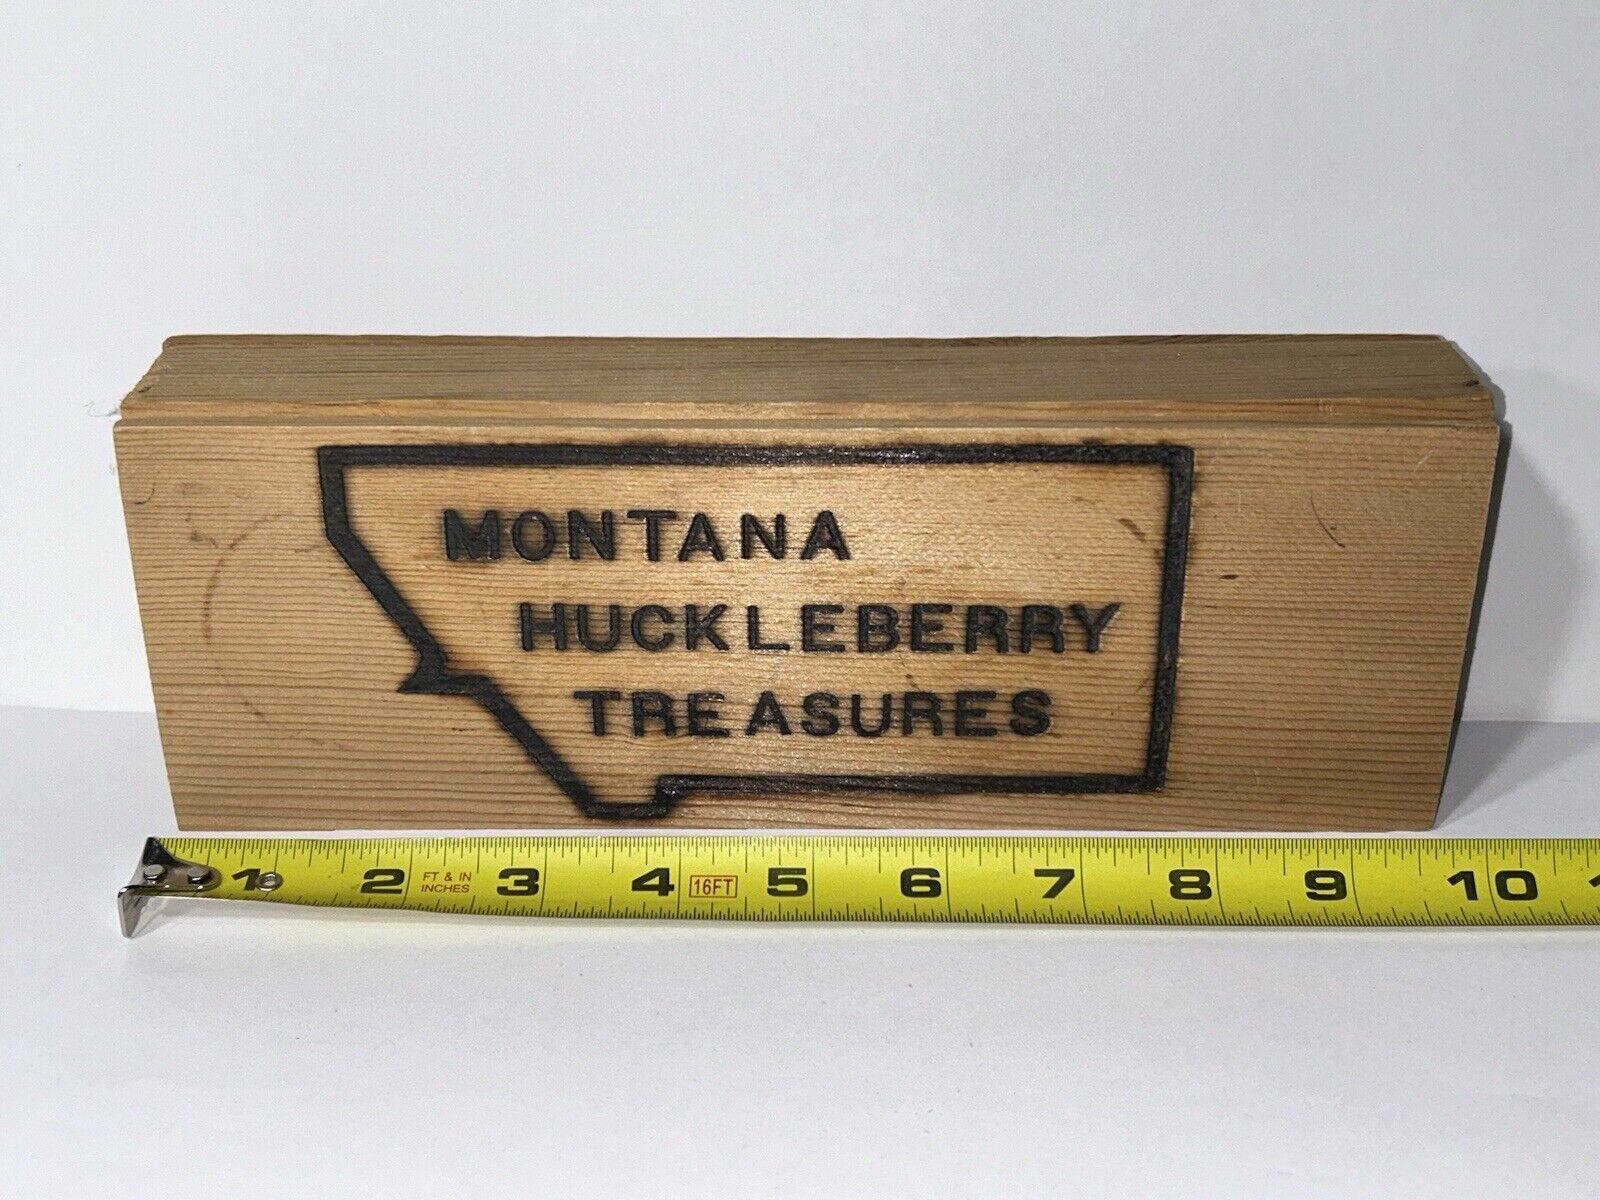 Vintage Montana Huckleberry Treasures Wooden Box with Pyrography Lettered Lid